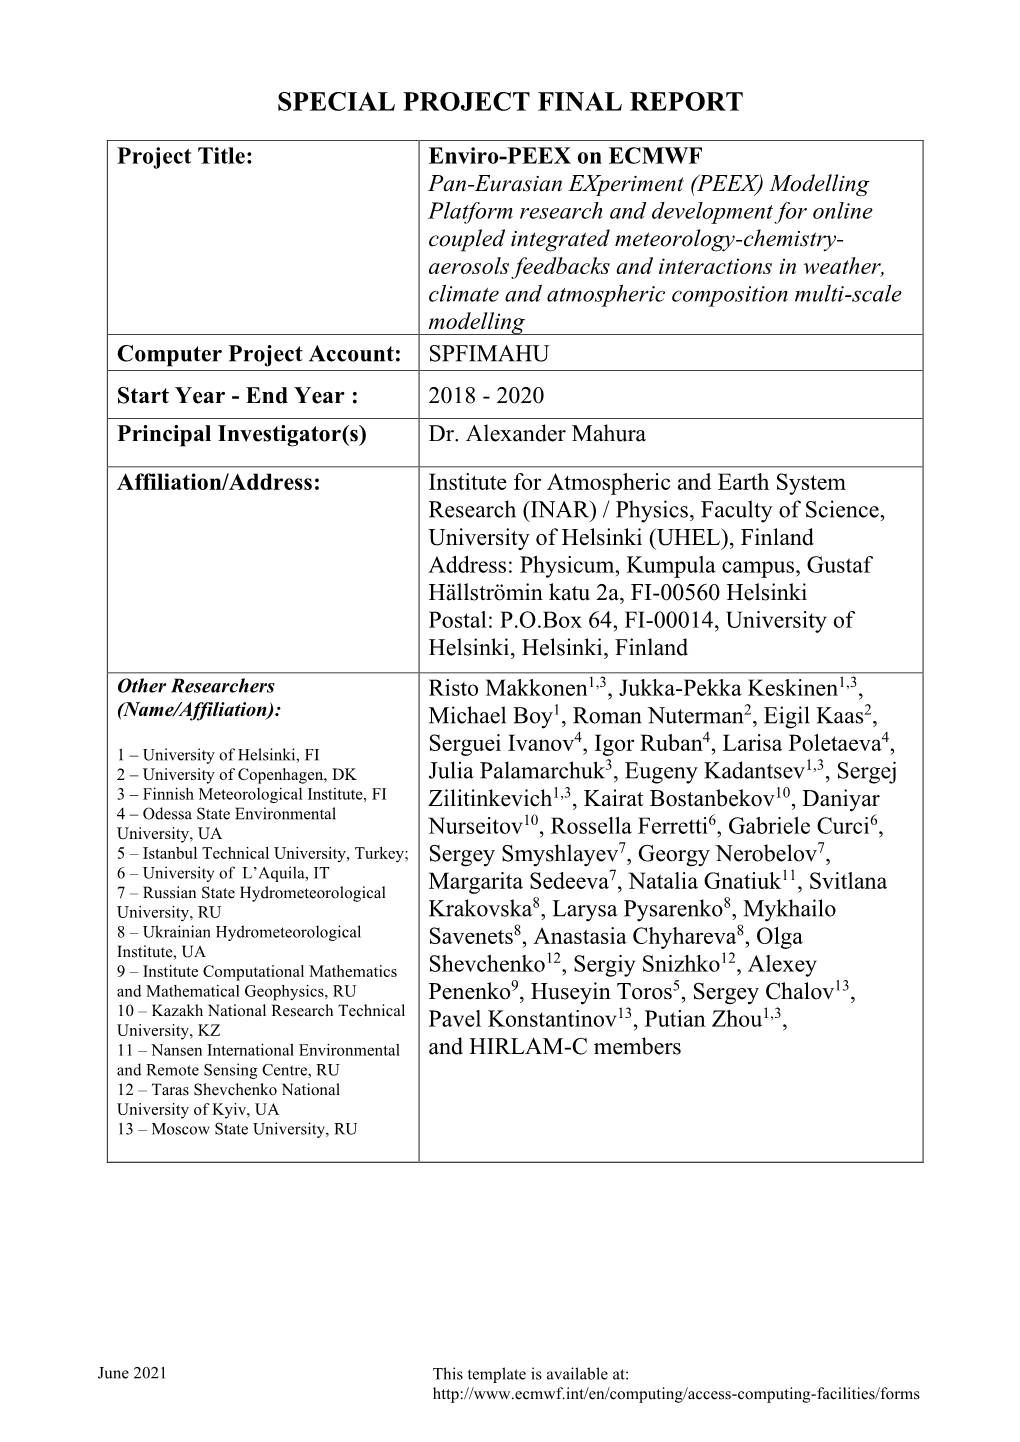 Special Project Final Report Template